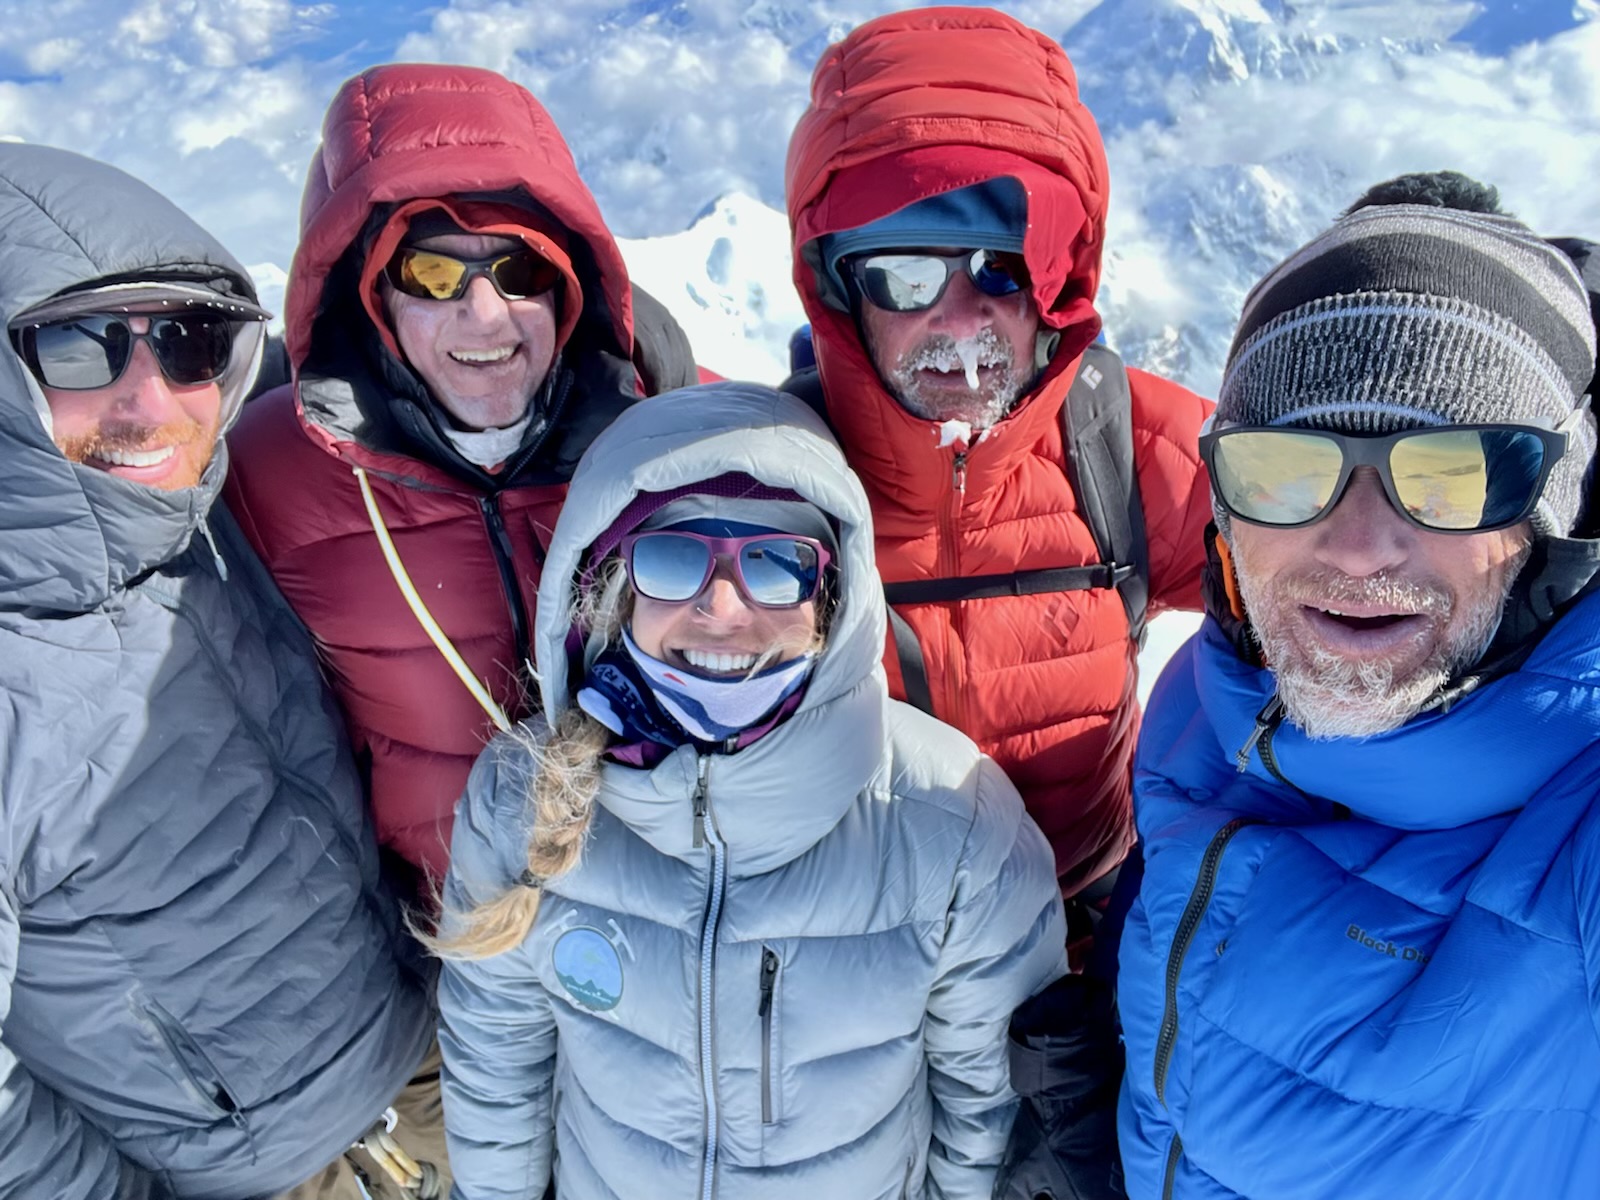 Five well-bundled and frosty climbers smile take a selfie on the summit